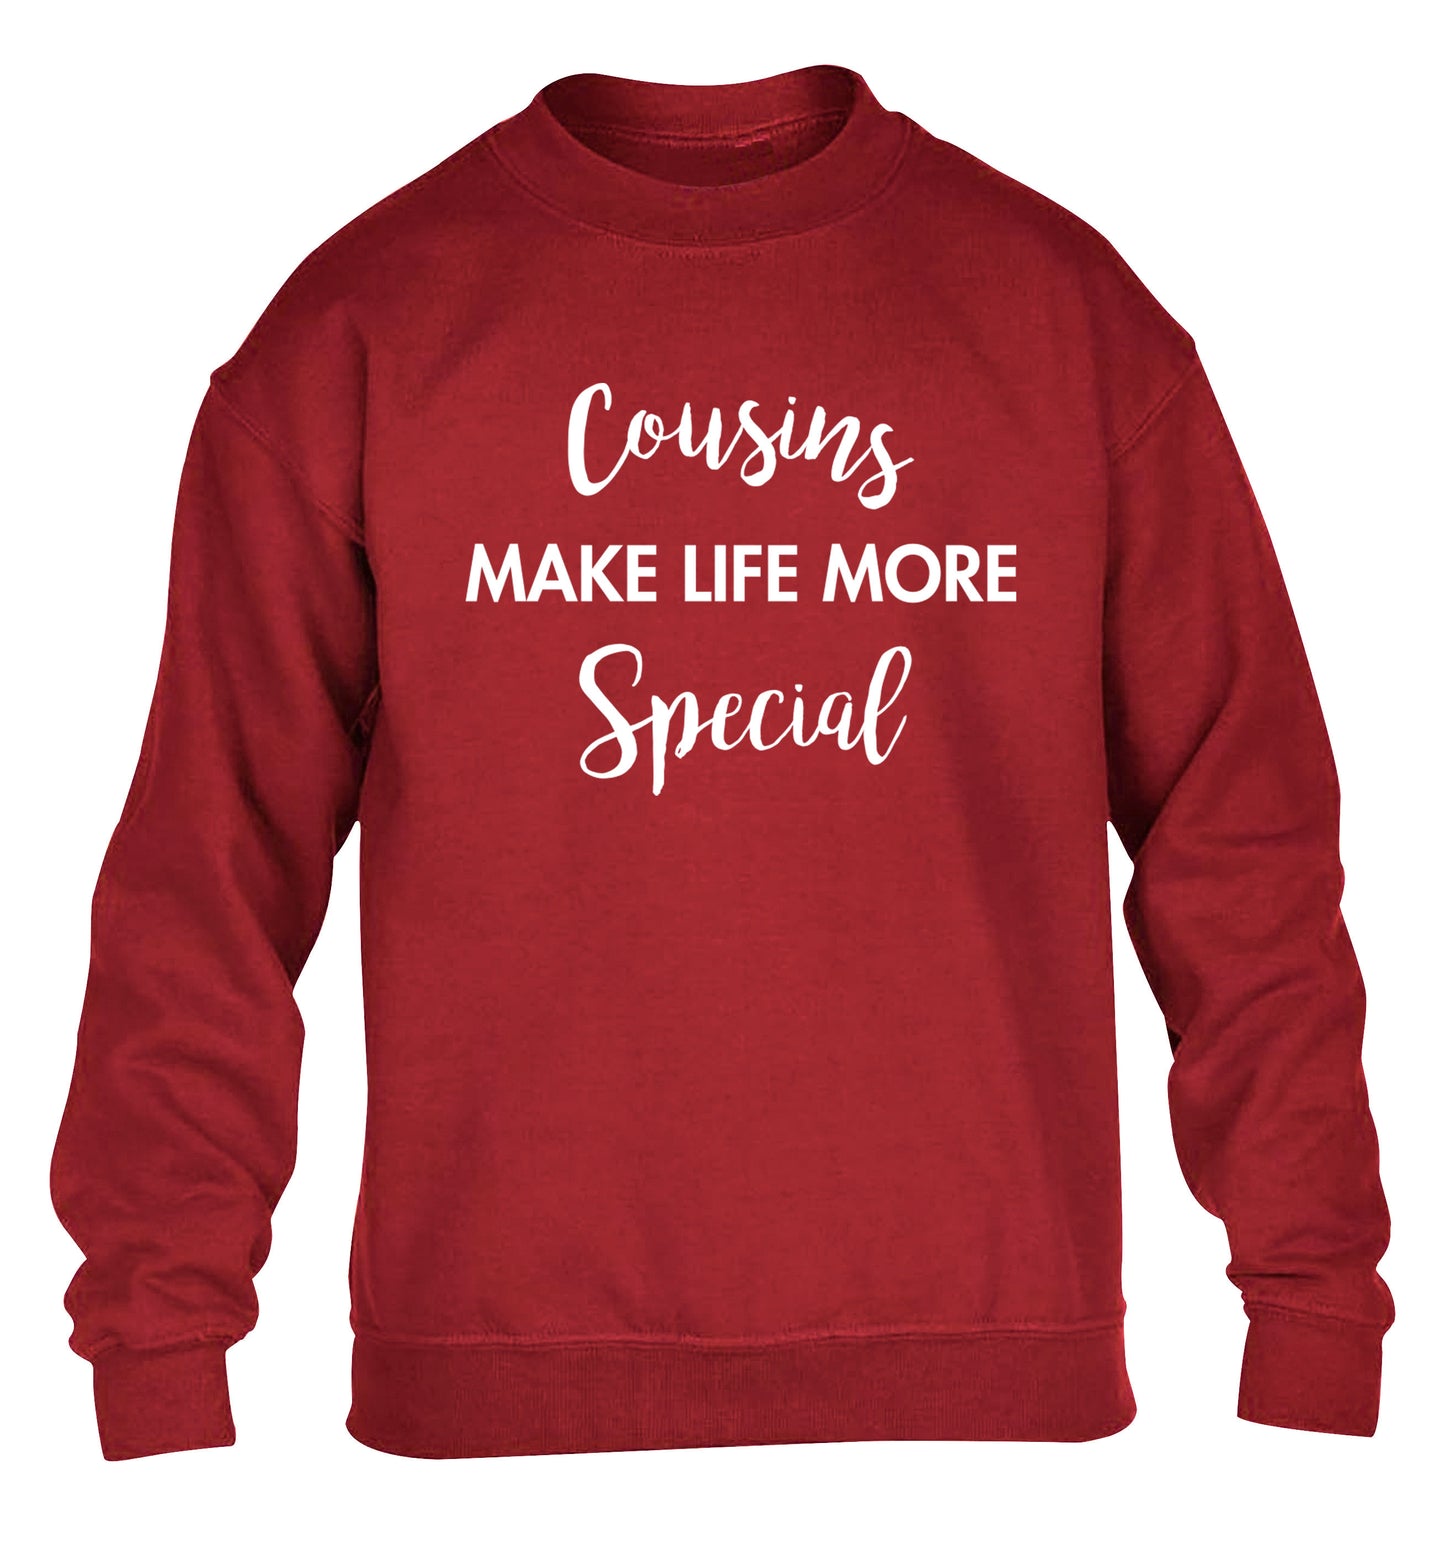 Cousins make life more special children's grey sweater 12-14 Years